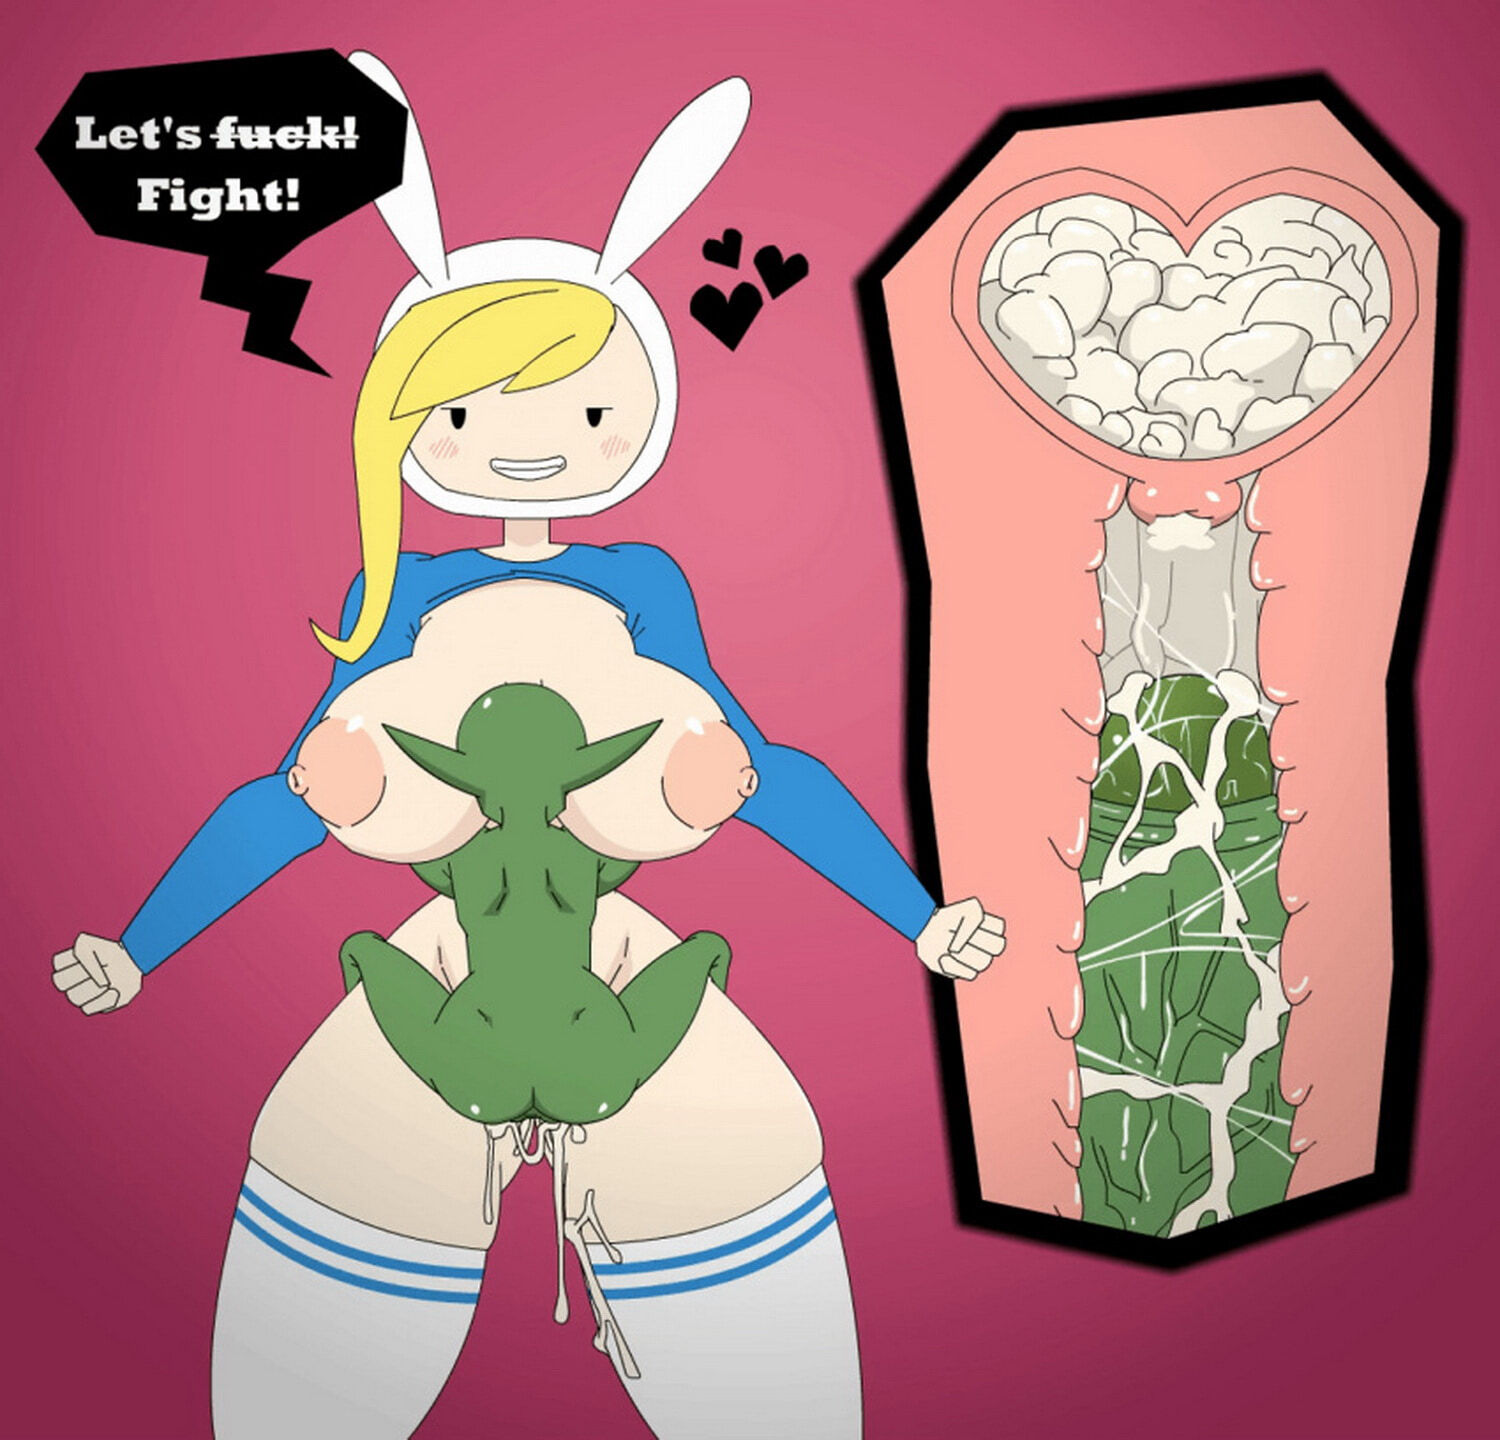 Fionna Cake Adventure Time Shemale Porn - Adventure time fionna boobs titty fuck - Best adult videos and photos